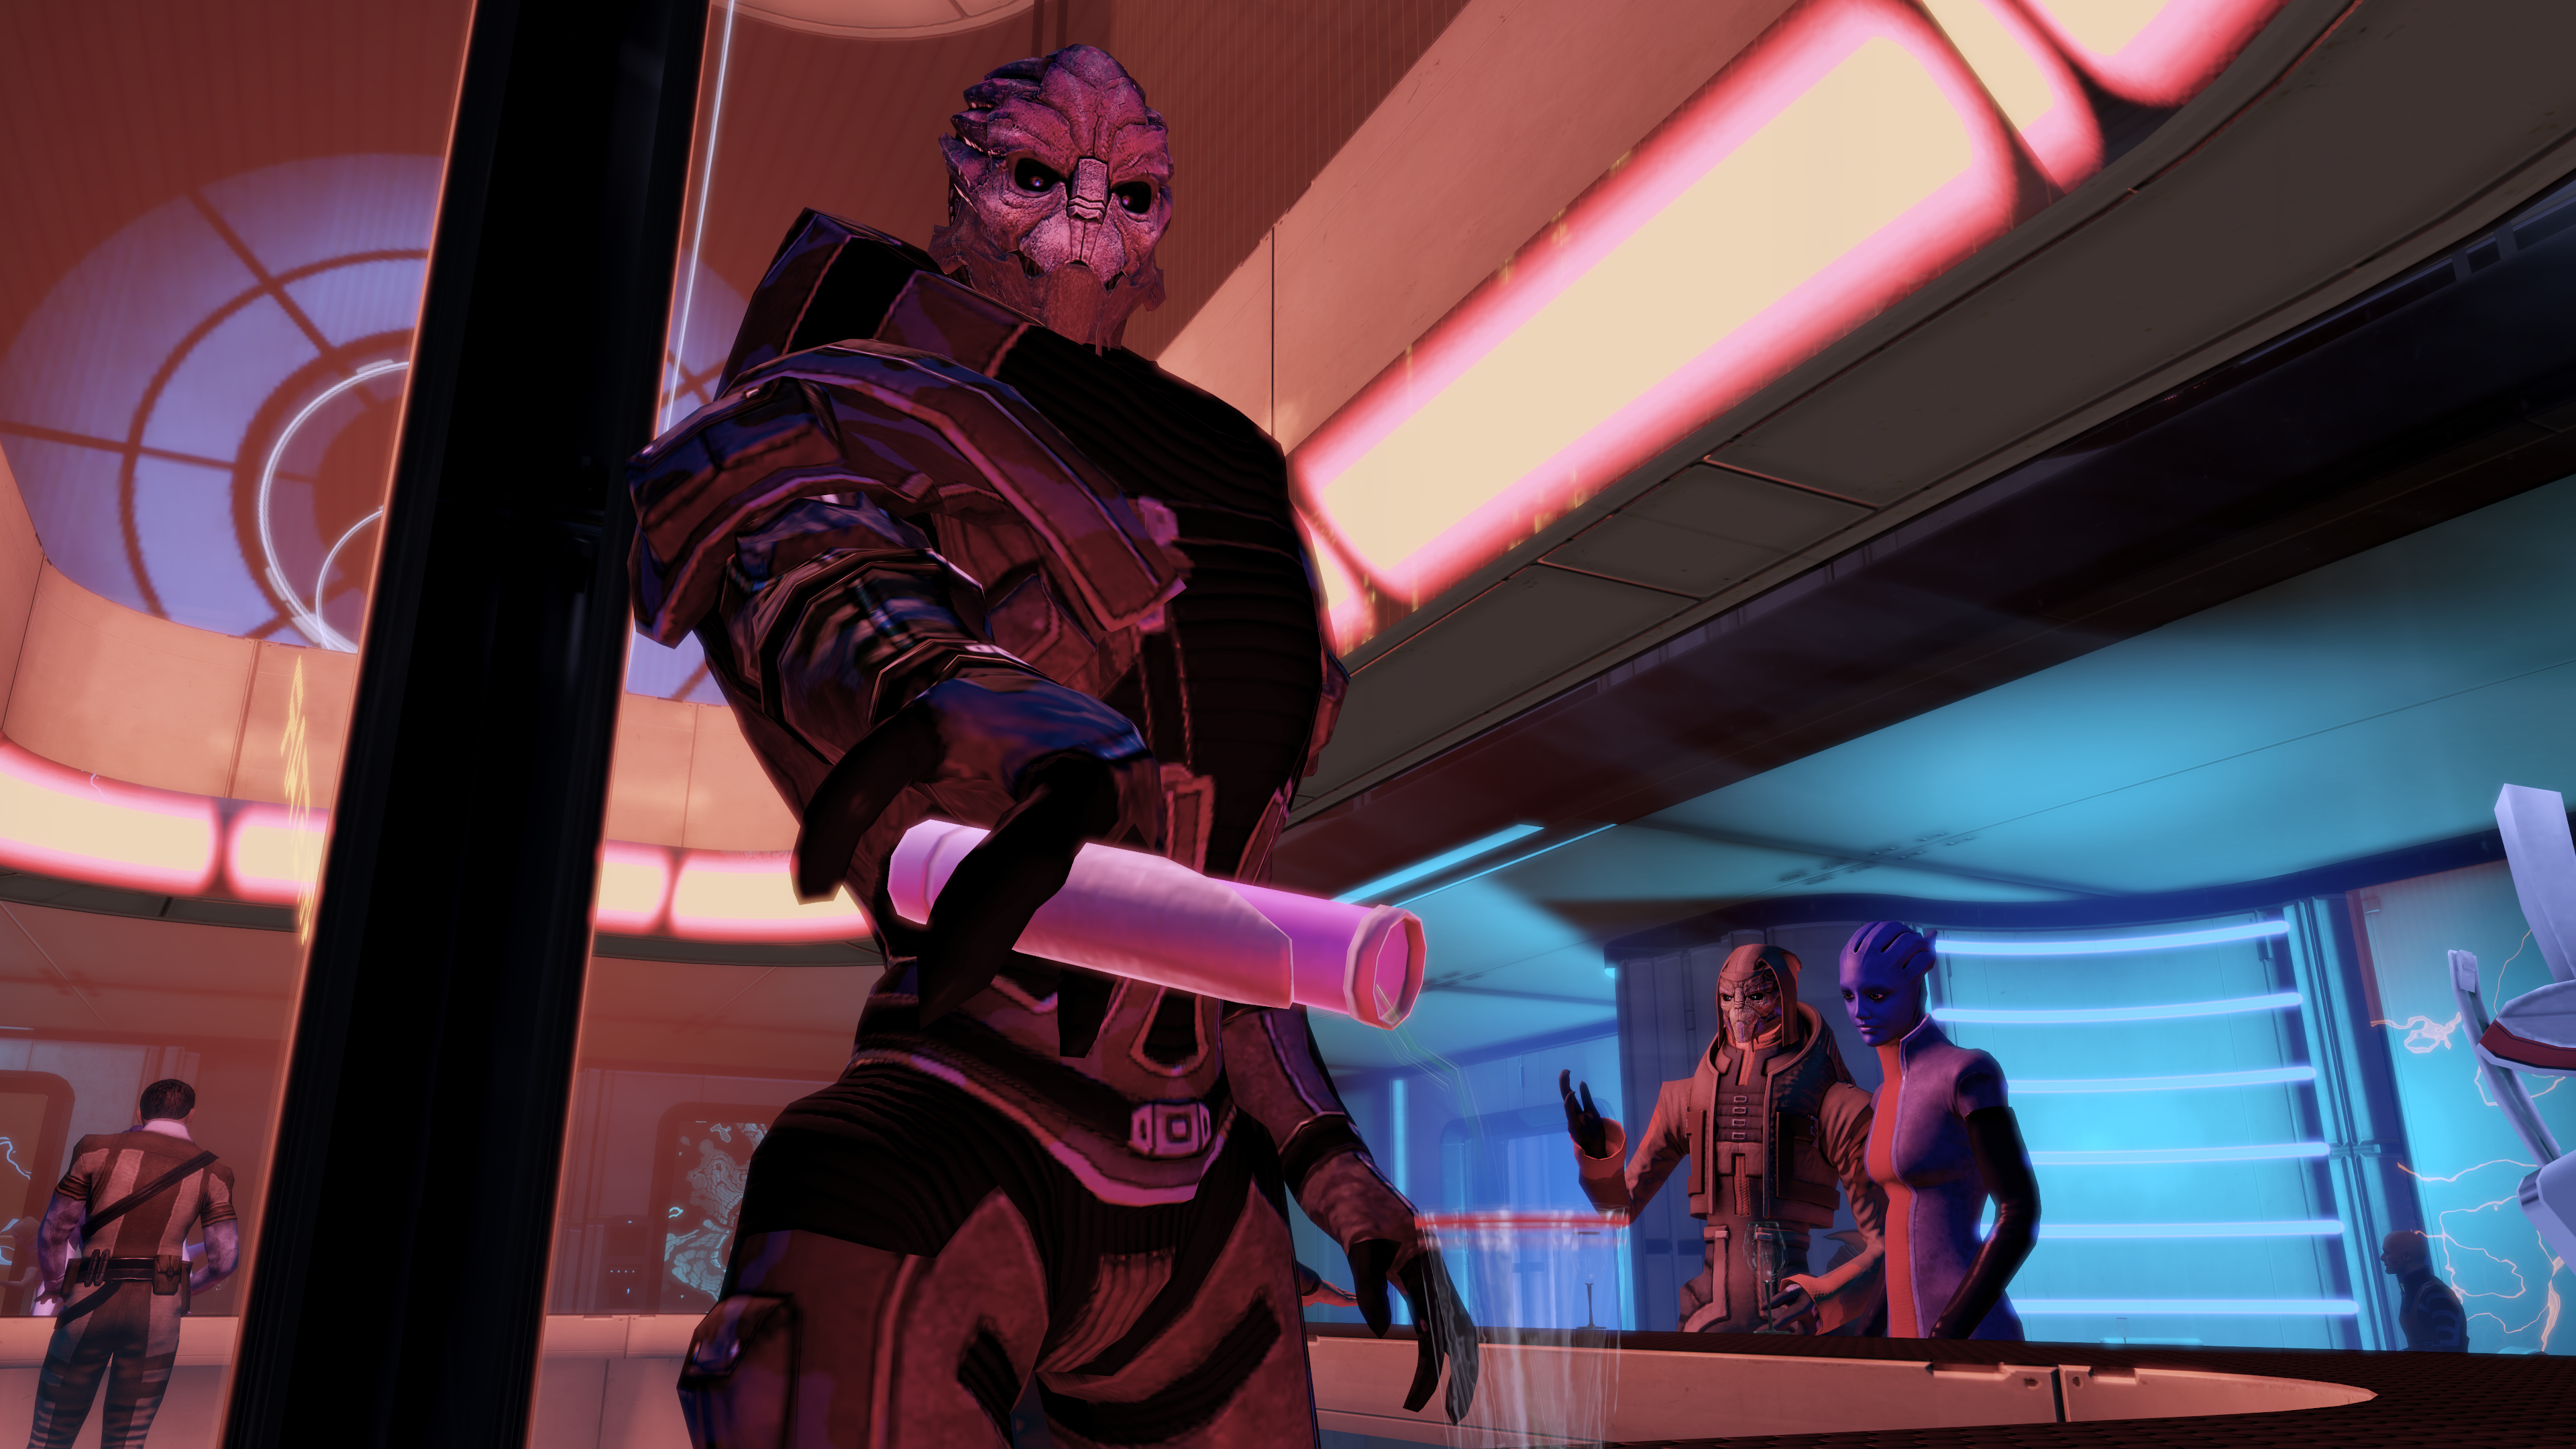 Mass Effect Turian Porn - Search Stories - Hentai Foundry